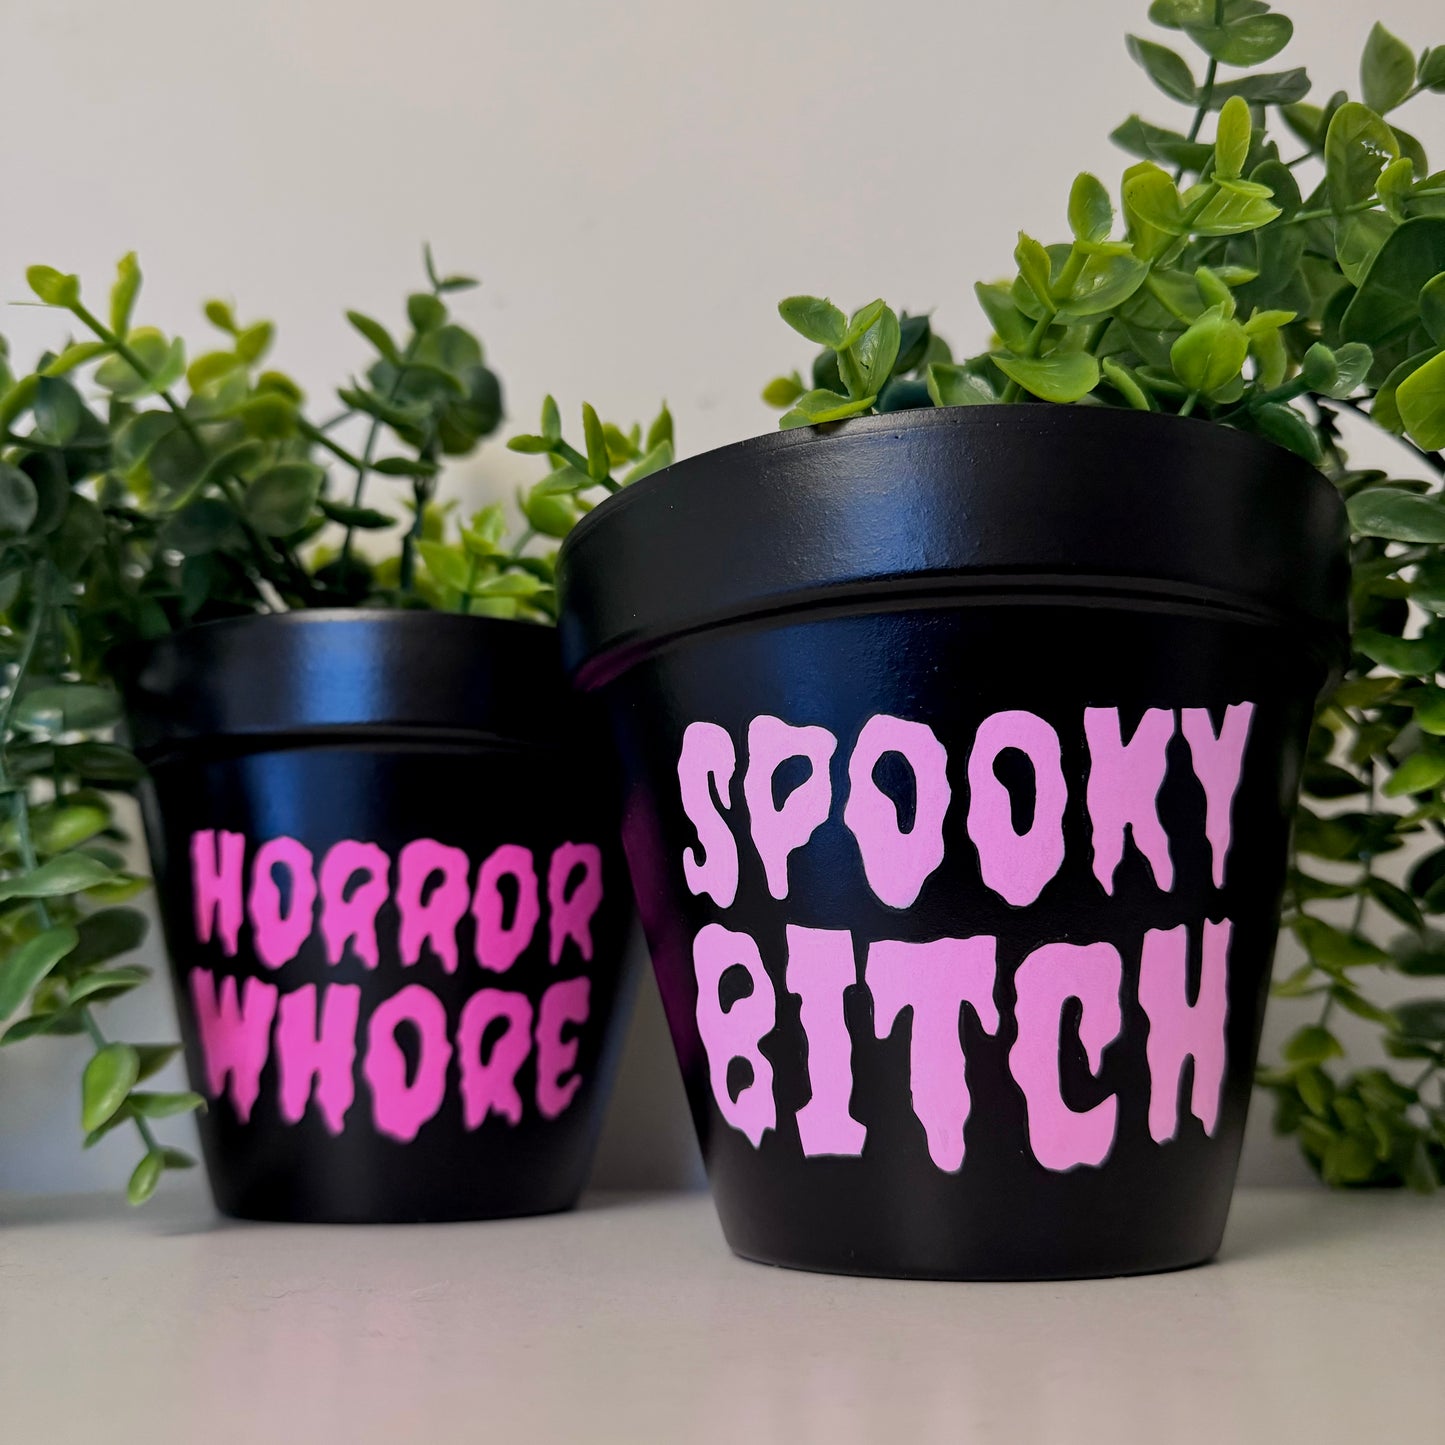 Spooky Bitch / Horror Whore Hand Painted Planters